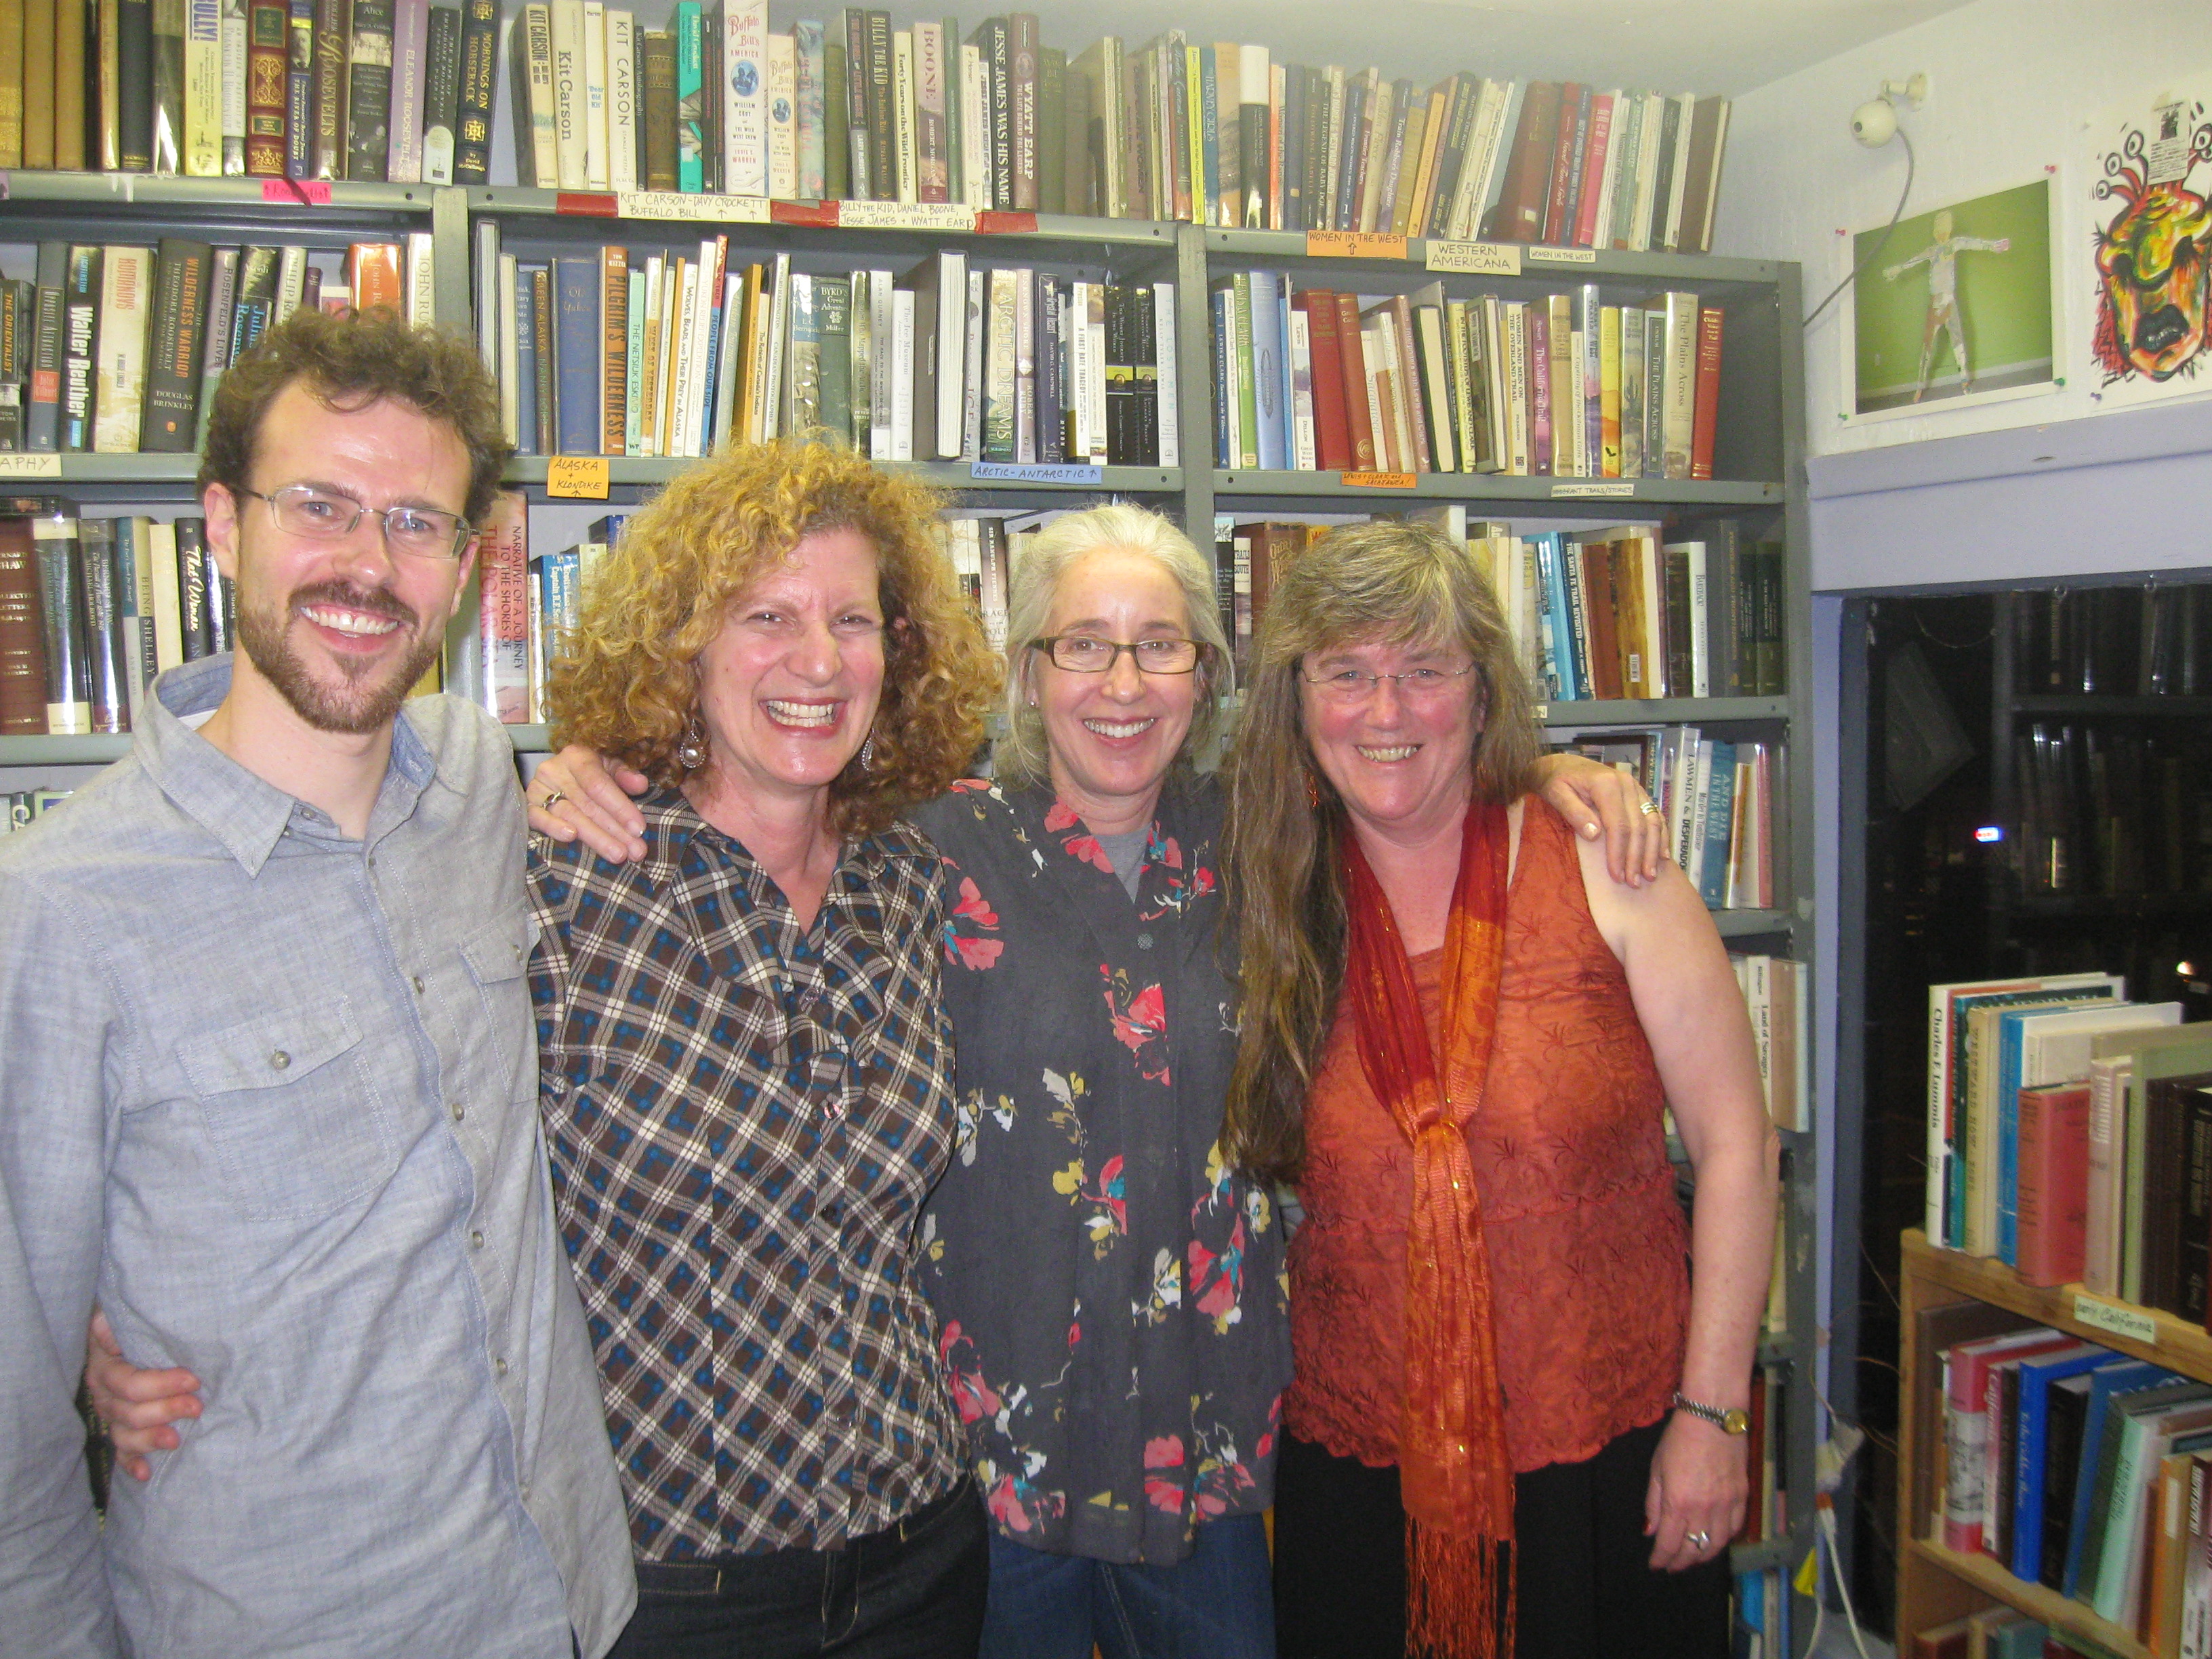 Great Overland Book Company poetry reading with fellow Writing Salon teachers Ben Jackson, Alison Luterman, and Julie Bruck. (April, 2014)